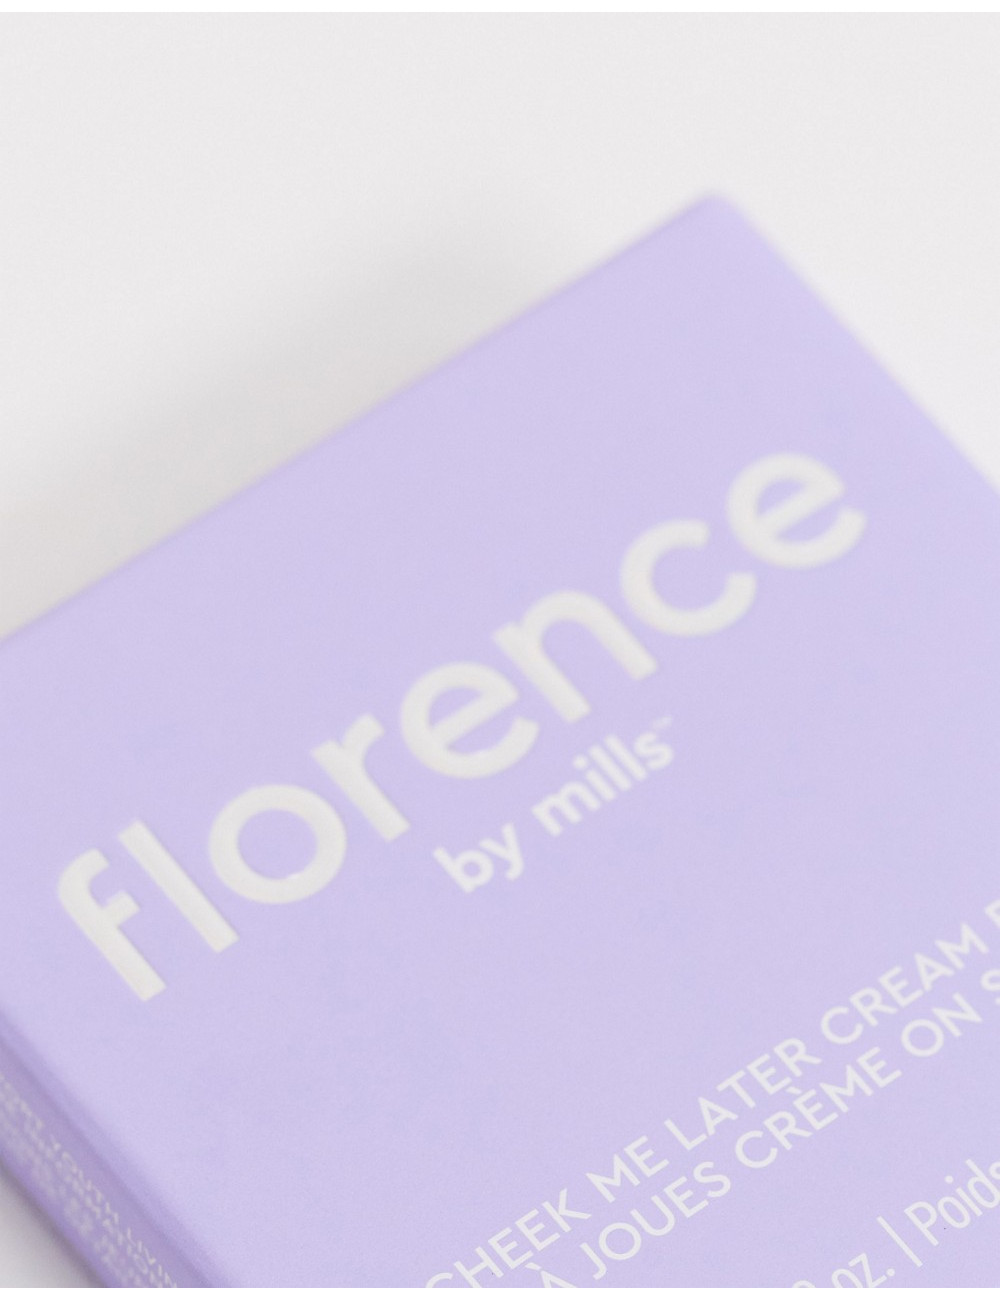 Florence By Mills Cheek Me...